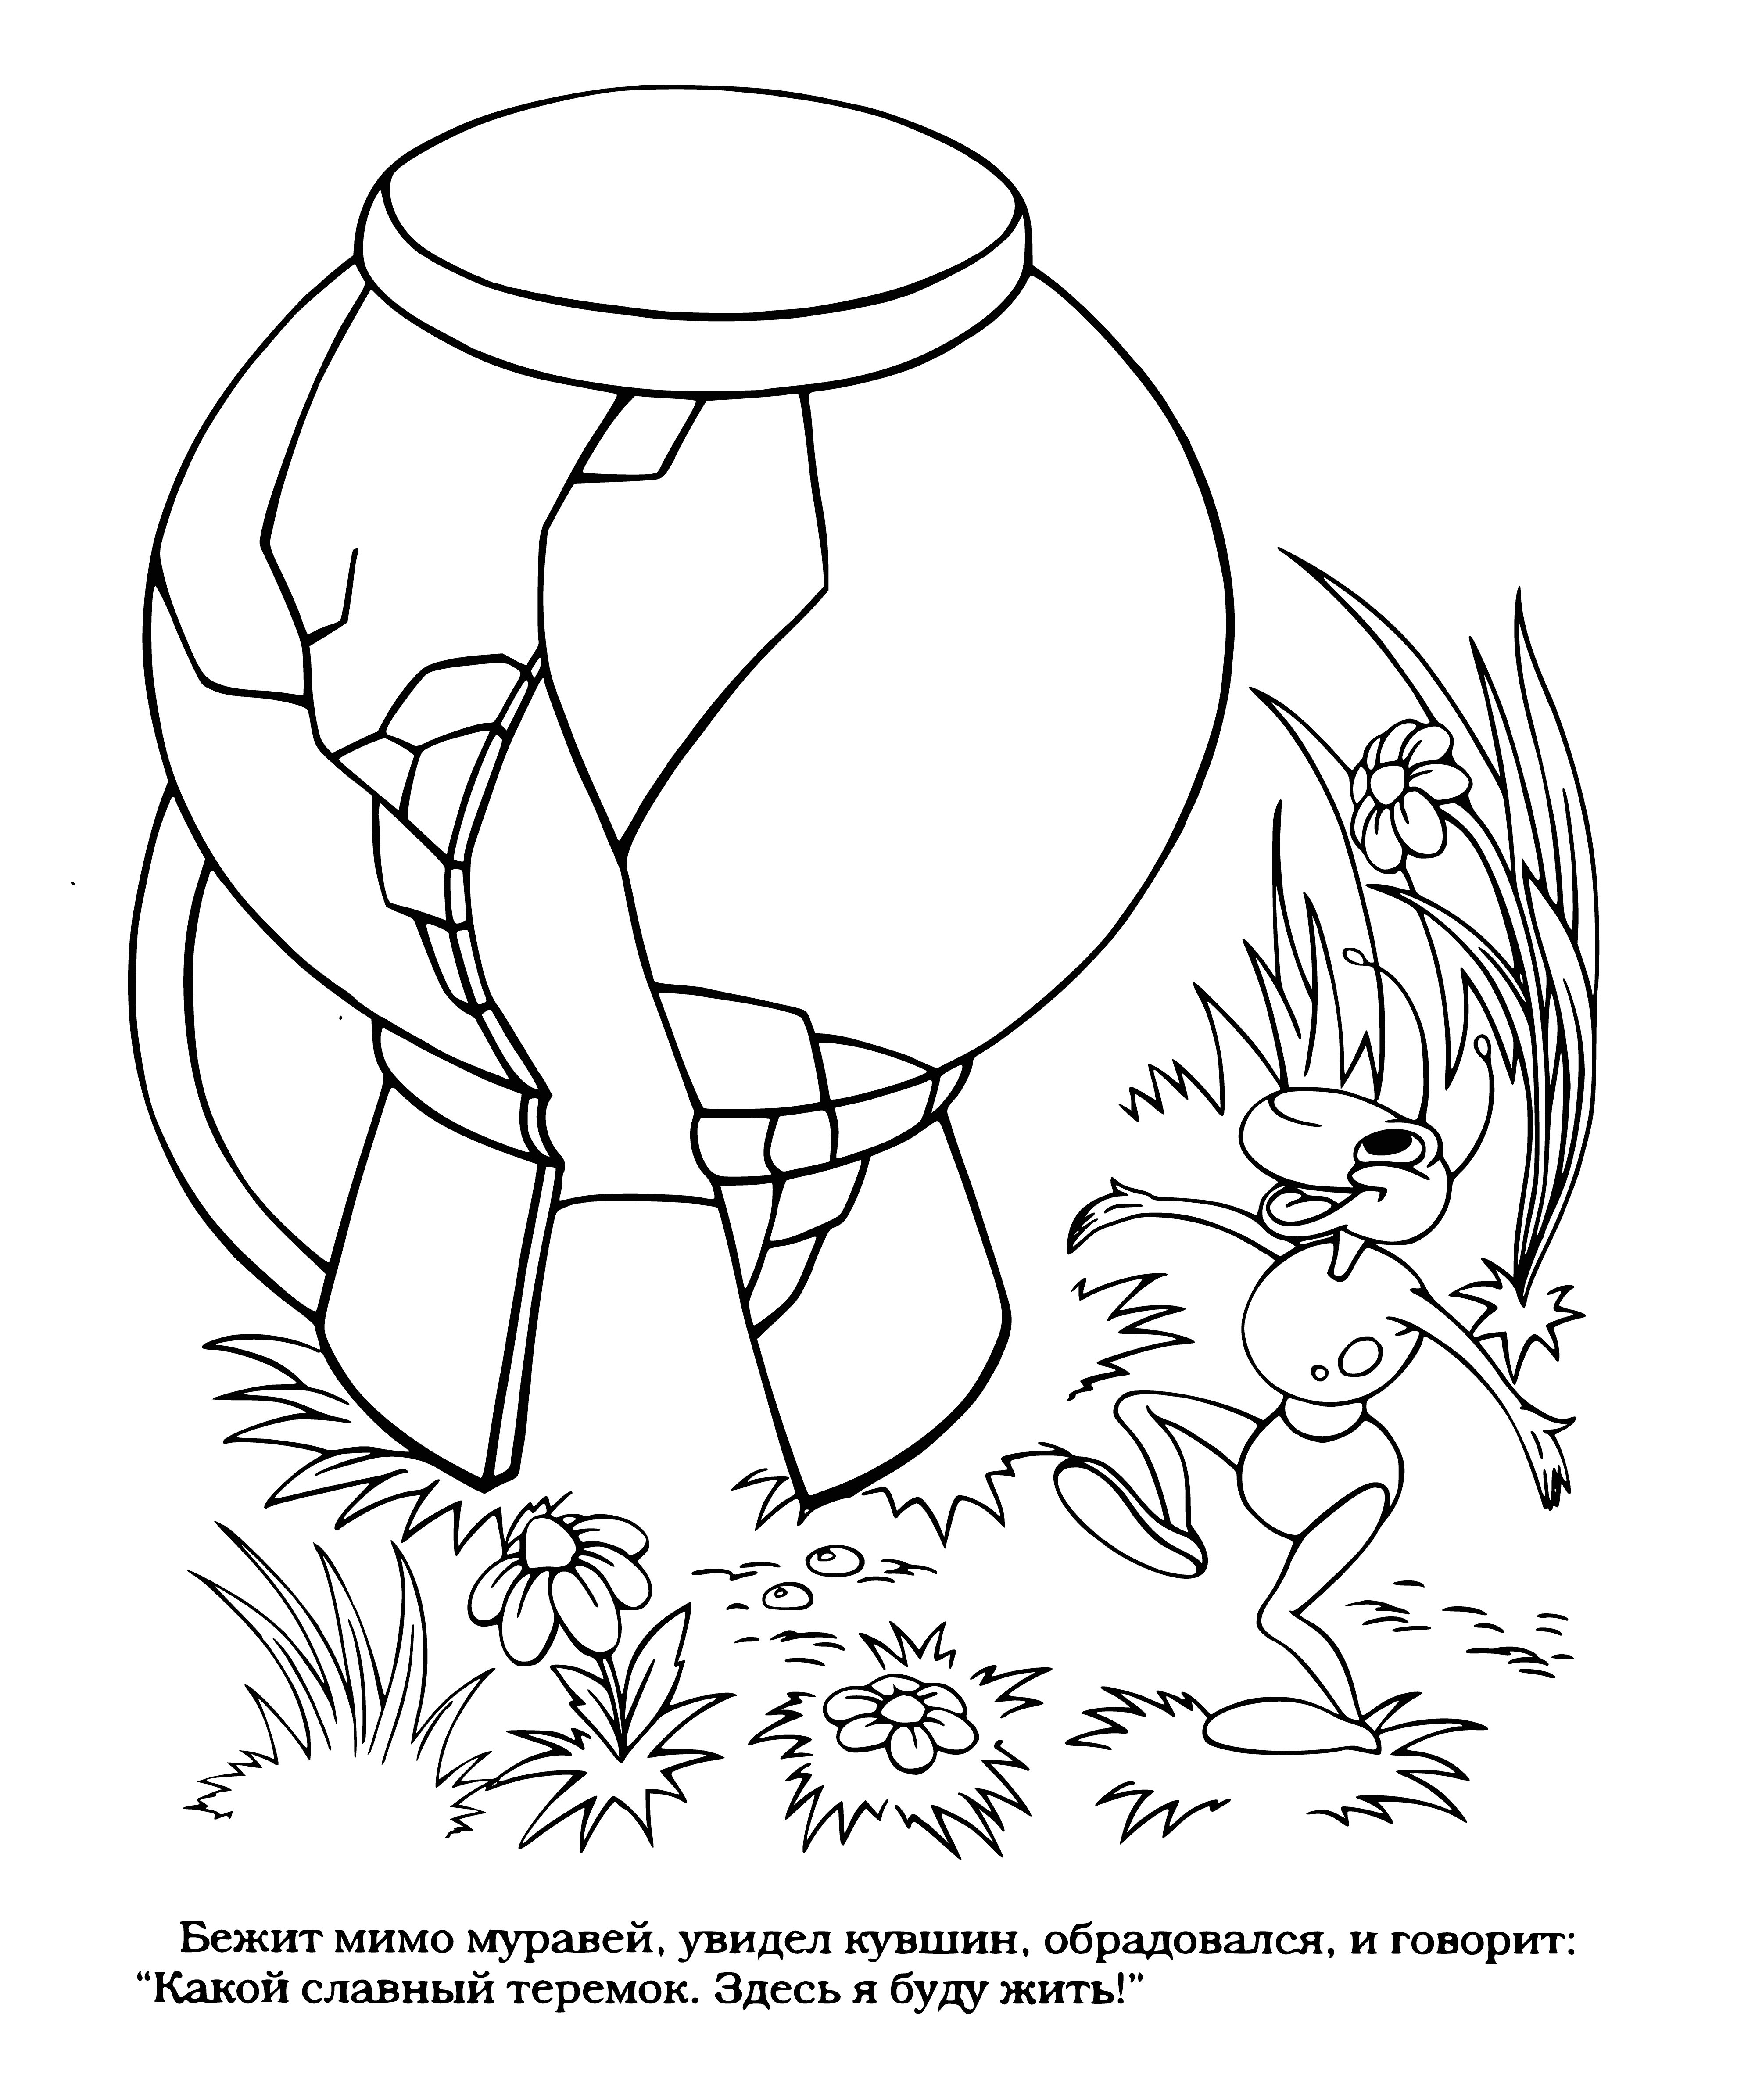 coloring page: A cozy teremok with a green roof and a tree with a swing where a little girl frolics.